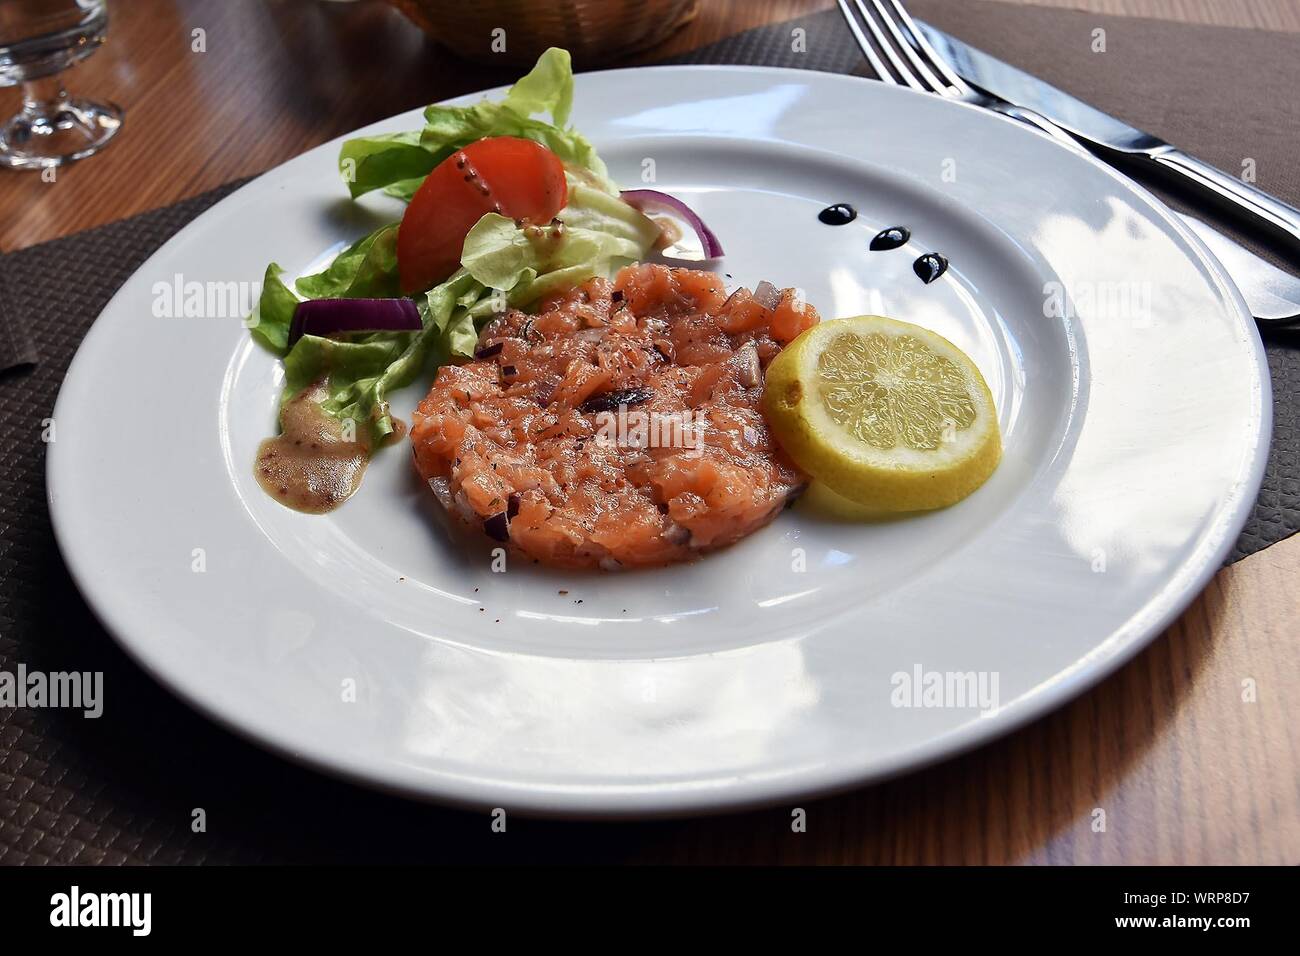 High Angle View Of French Food Served In Plate On Table Stock Photo